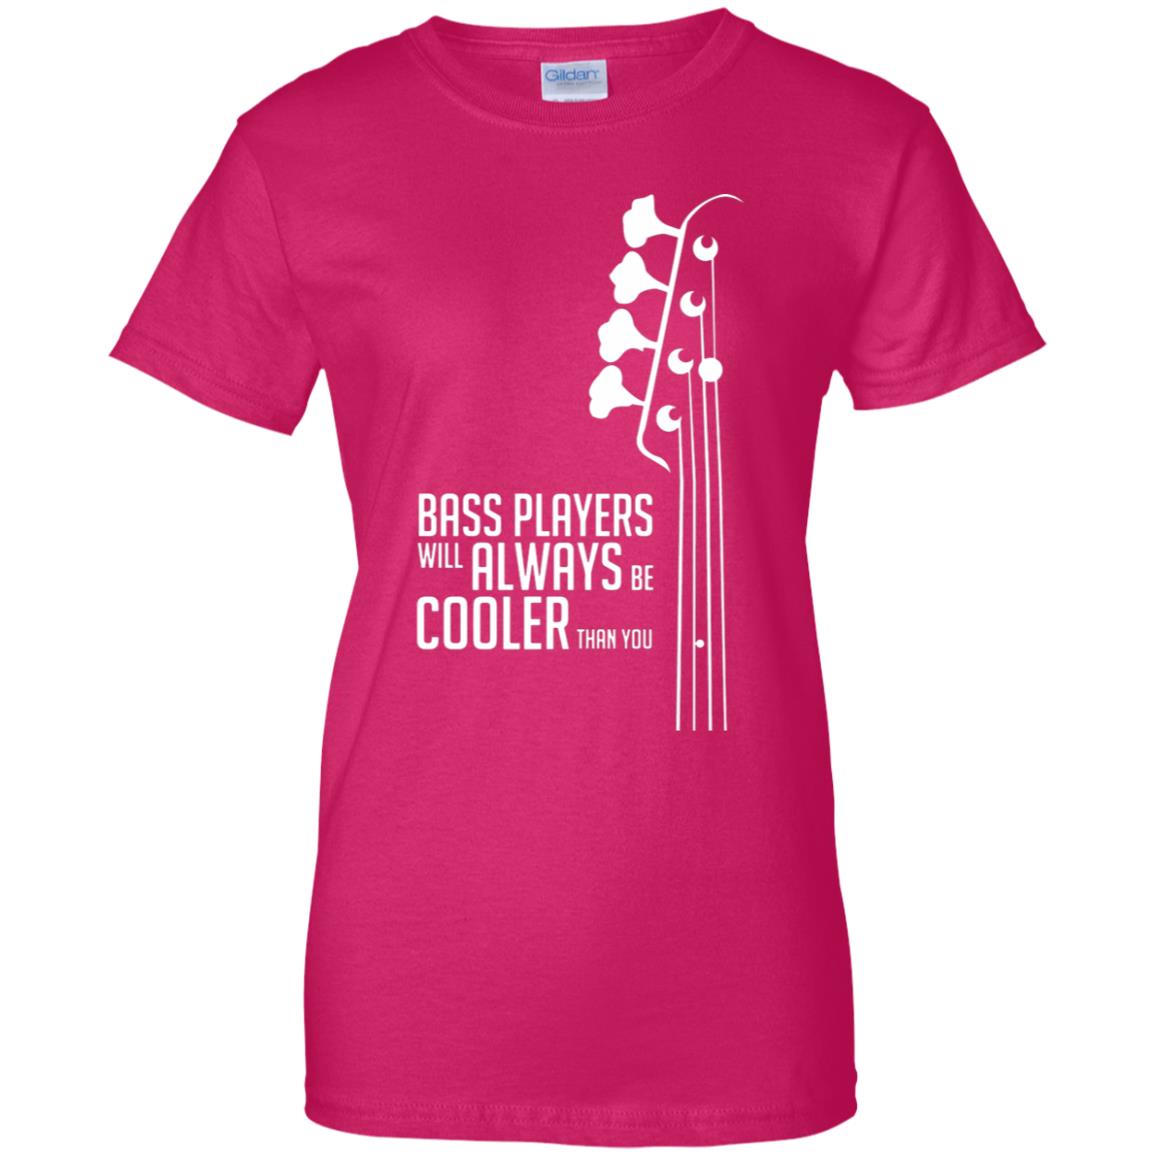 Bass Players Will Always Be Cooler Than You T-Shirt - 10% Off